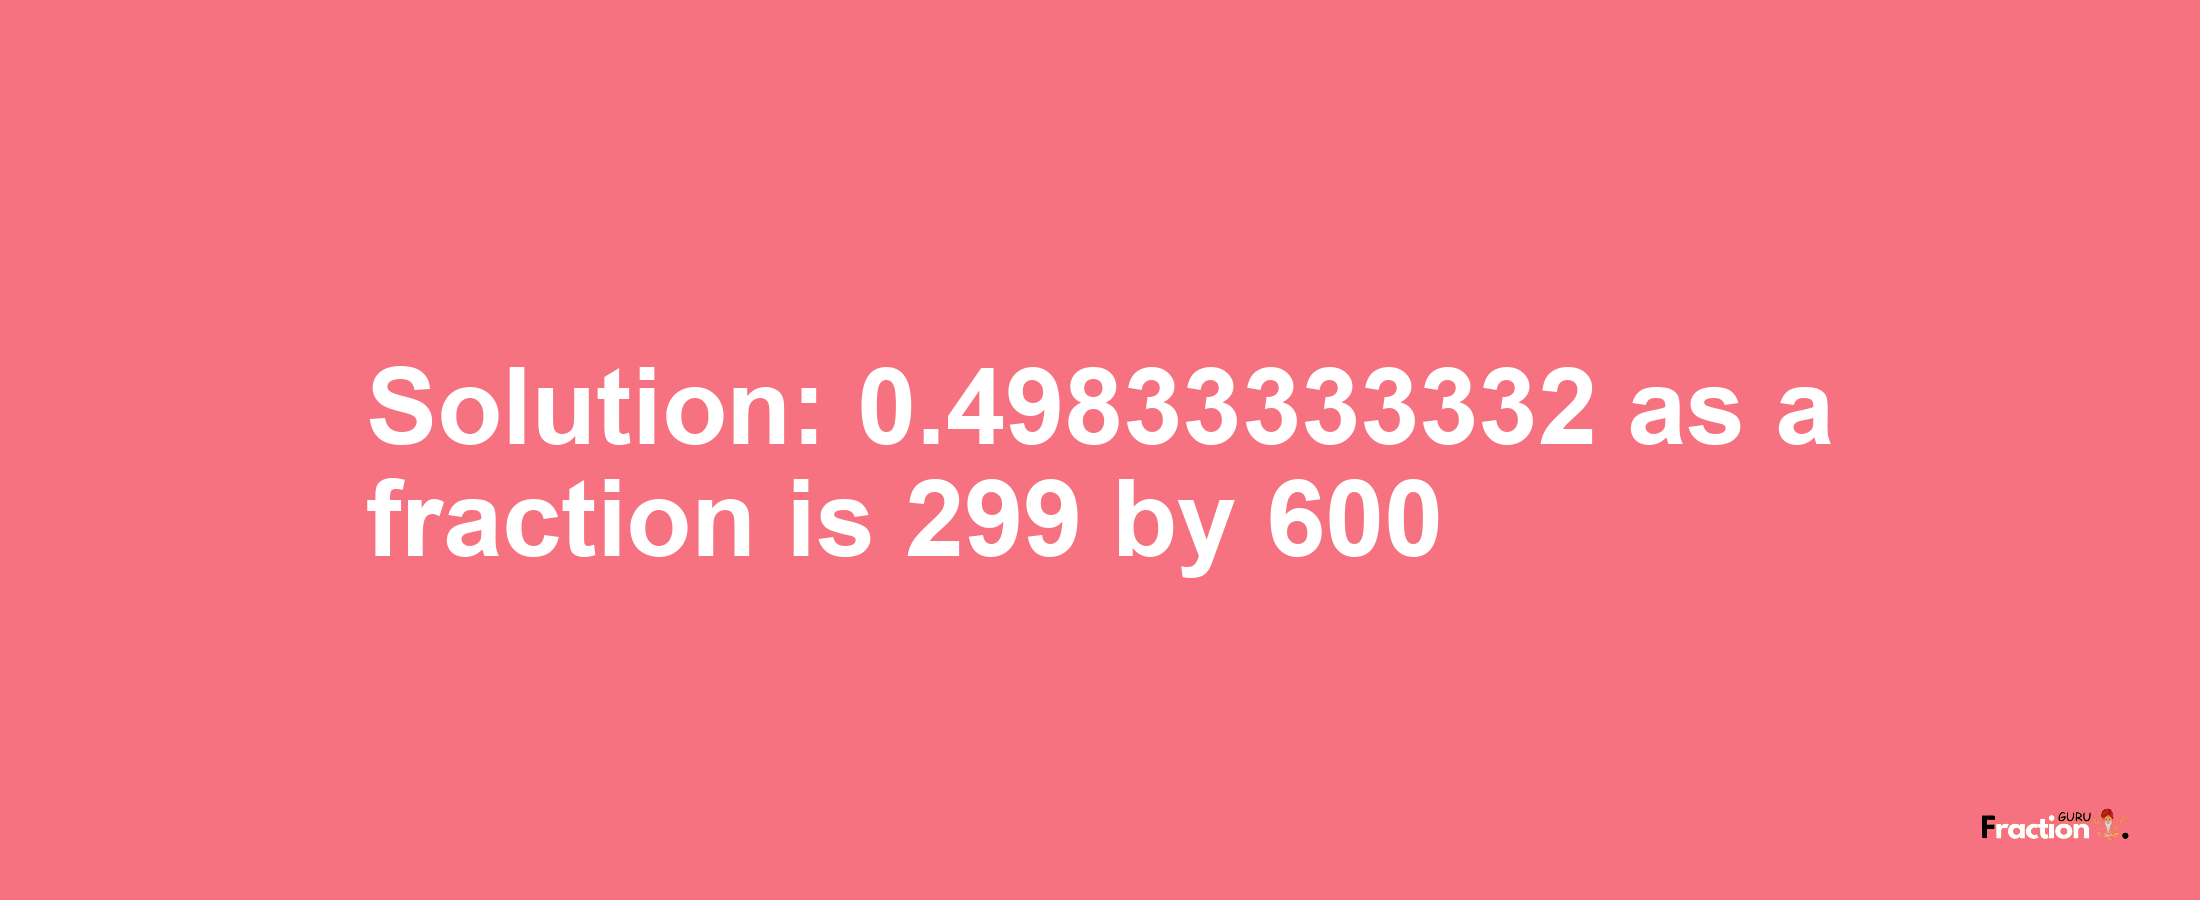 Solution:0.49833333332 as a fraction is 299/600